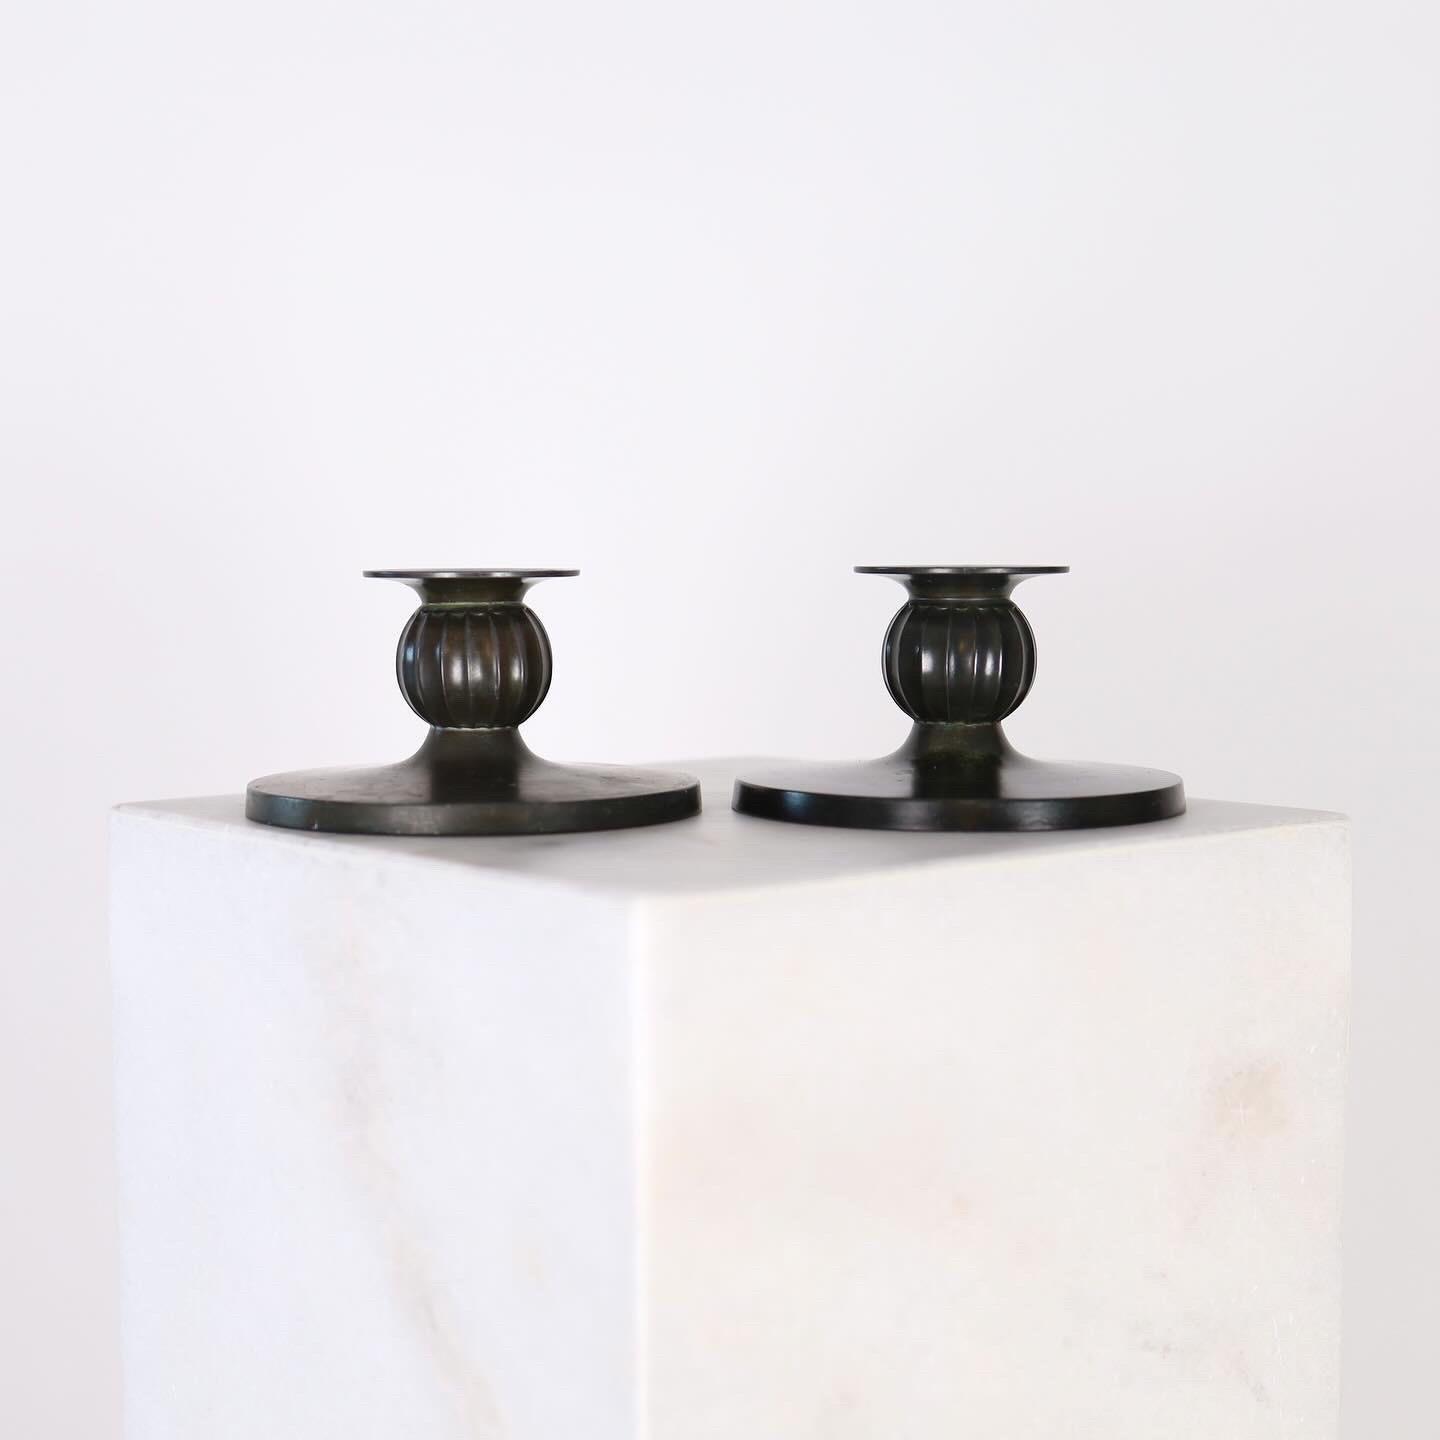 A fine set of candle holders designed by Just Andersen in 1933. A perfect detail to the modern interior.

* A pair of metal candlestick holders
* Designer: Just Andersen
* Manufacturer: Just Andersen
* Style: D1606
* Year: 1933
* Condition: Good